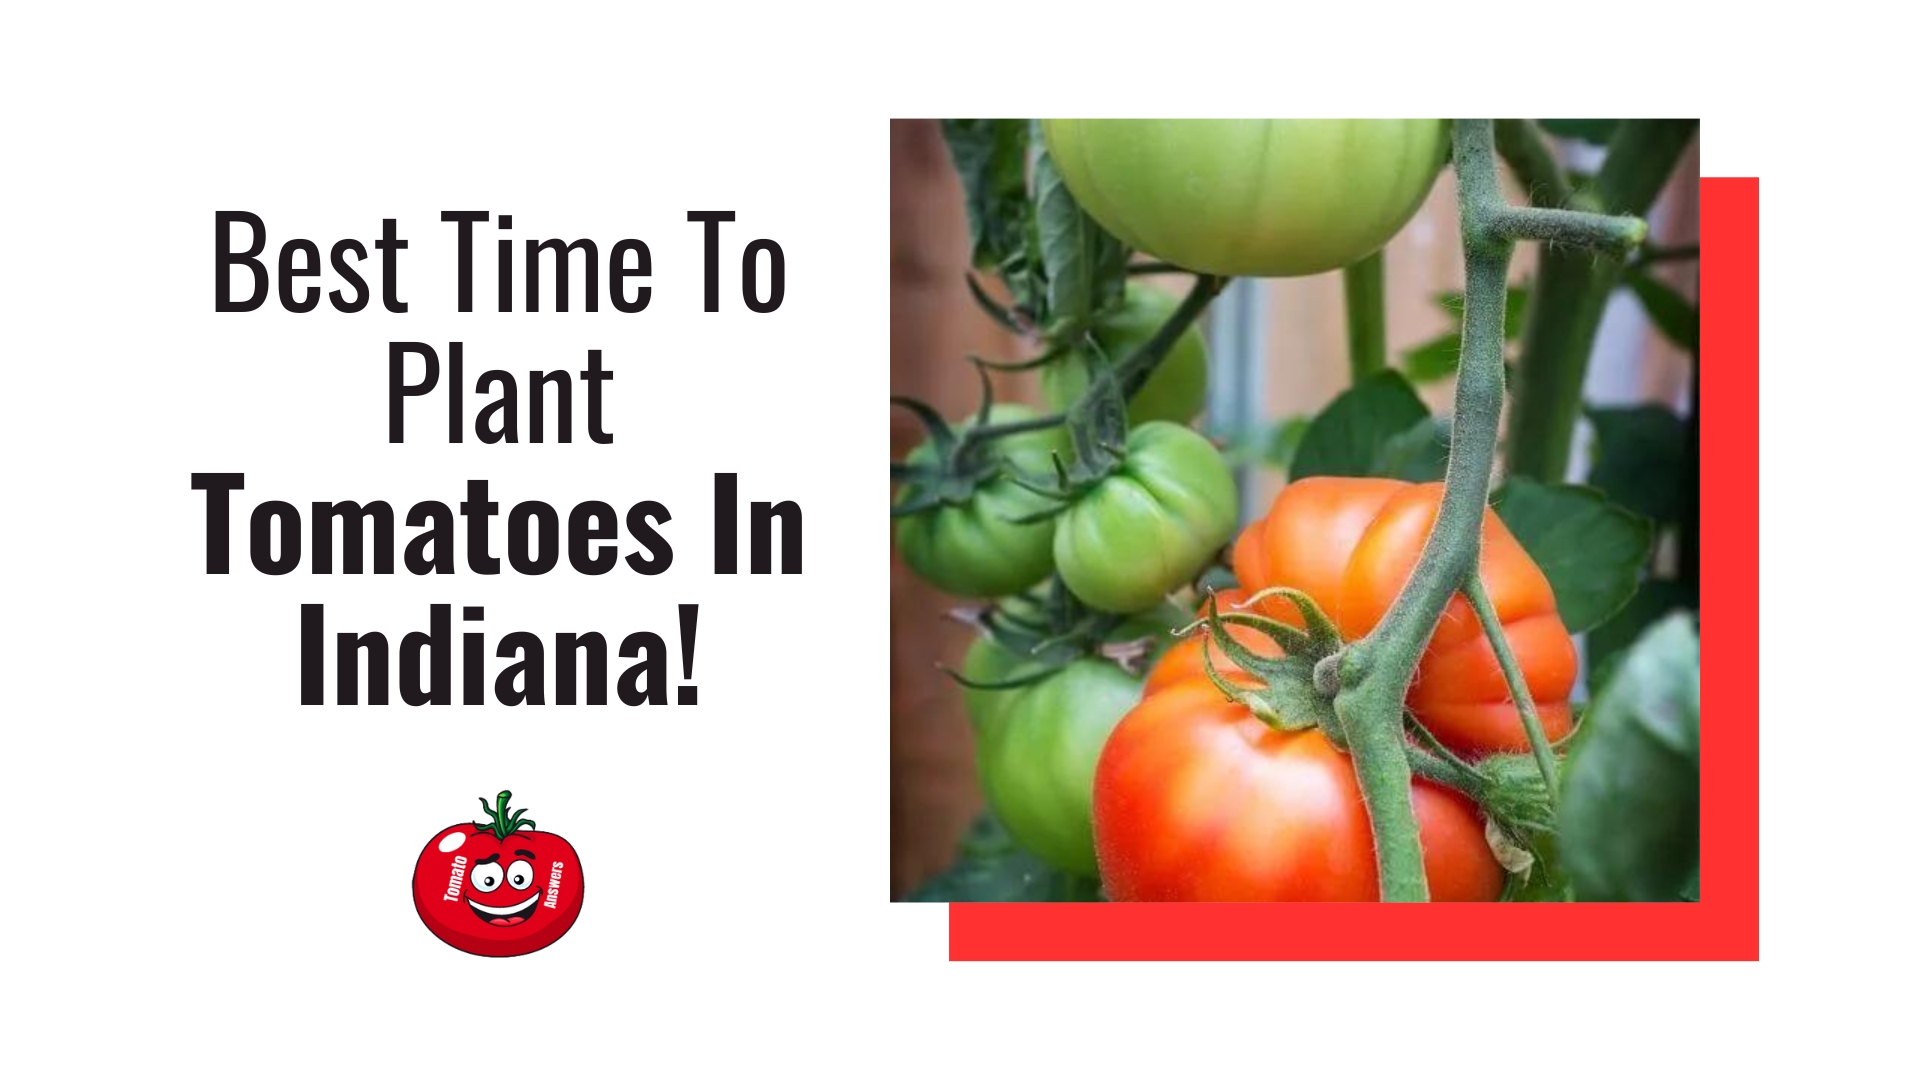 The Best Time To Plant Tomatoes In Indiana